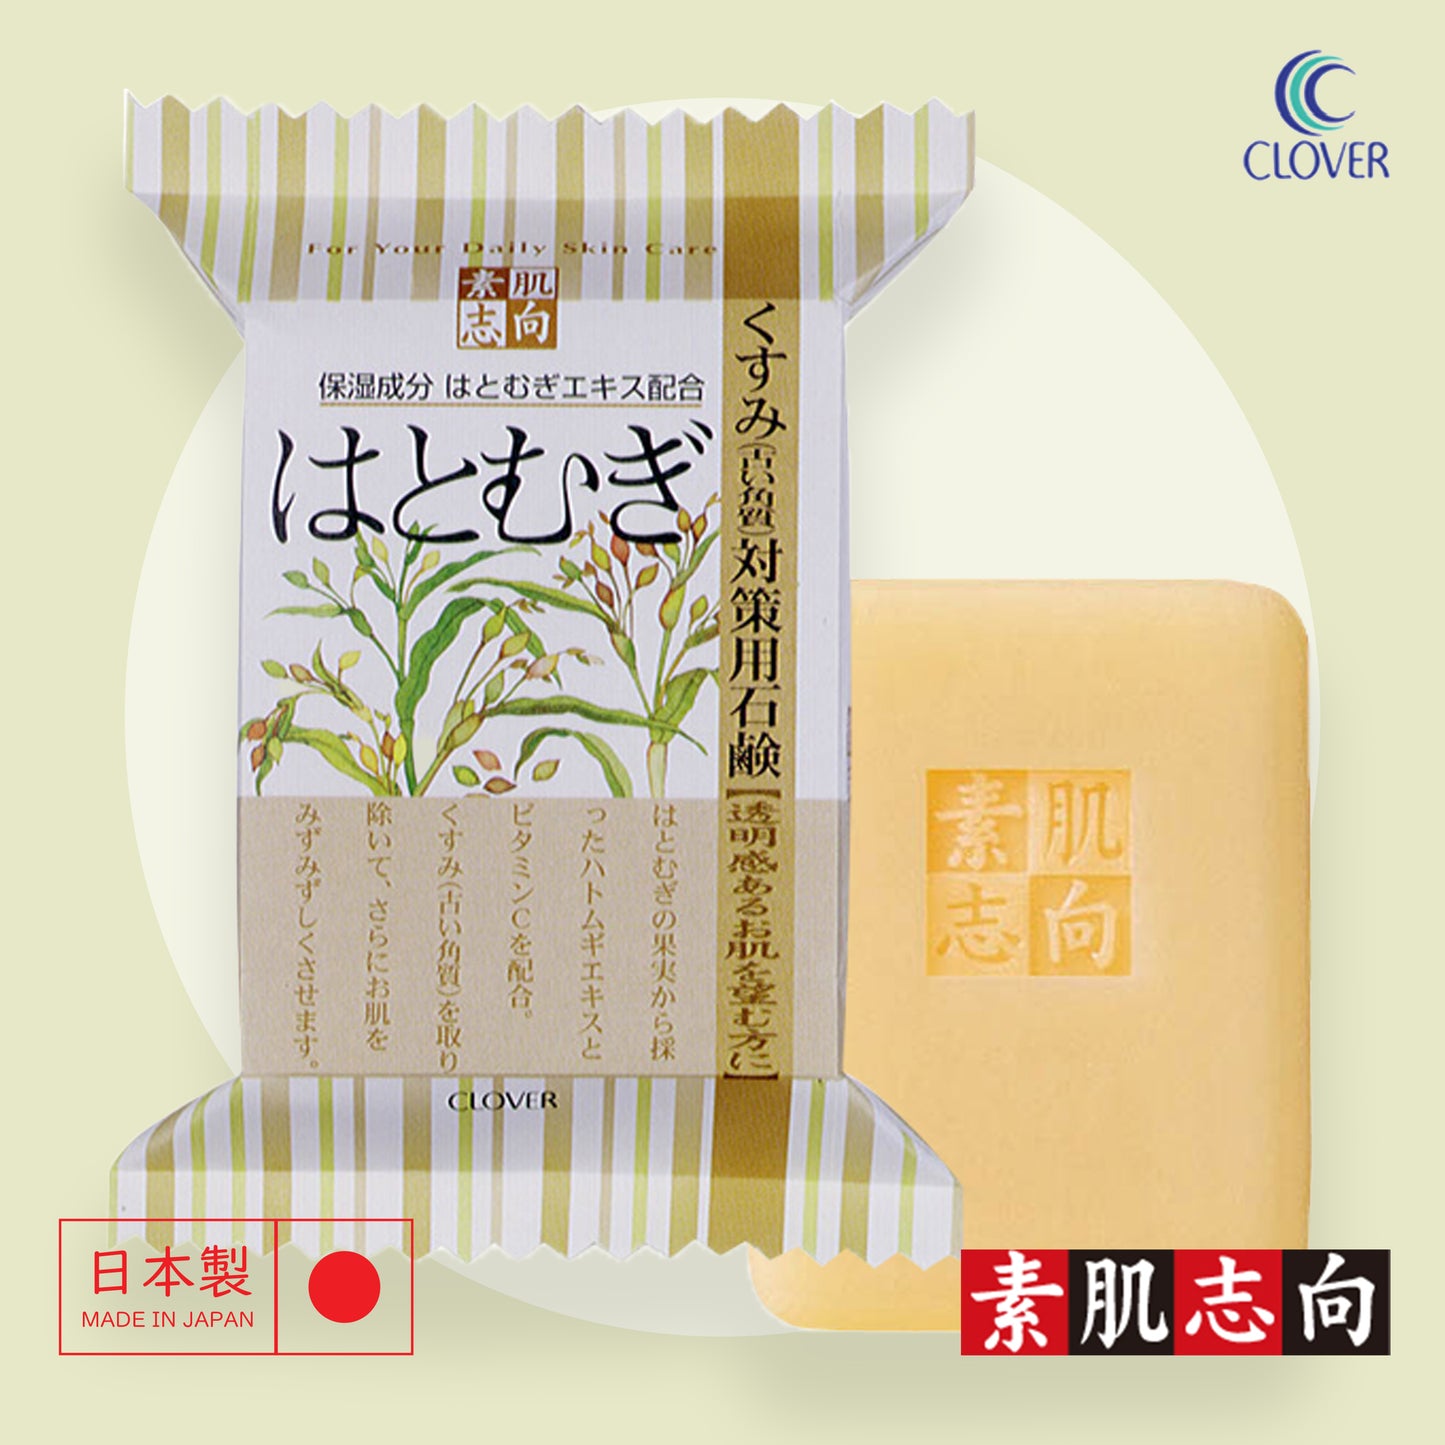 Coix Seed Extract Cleansing Soap